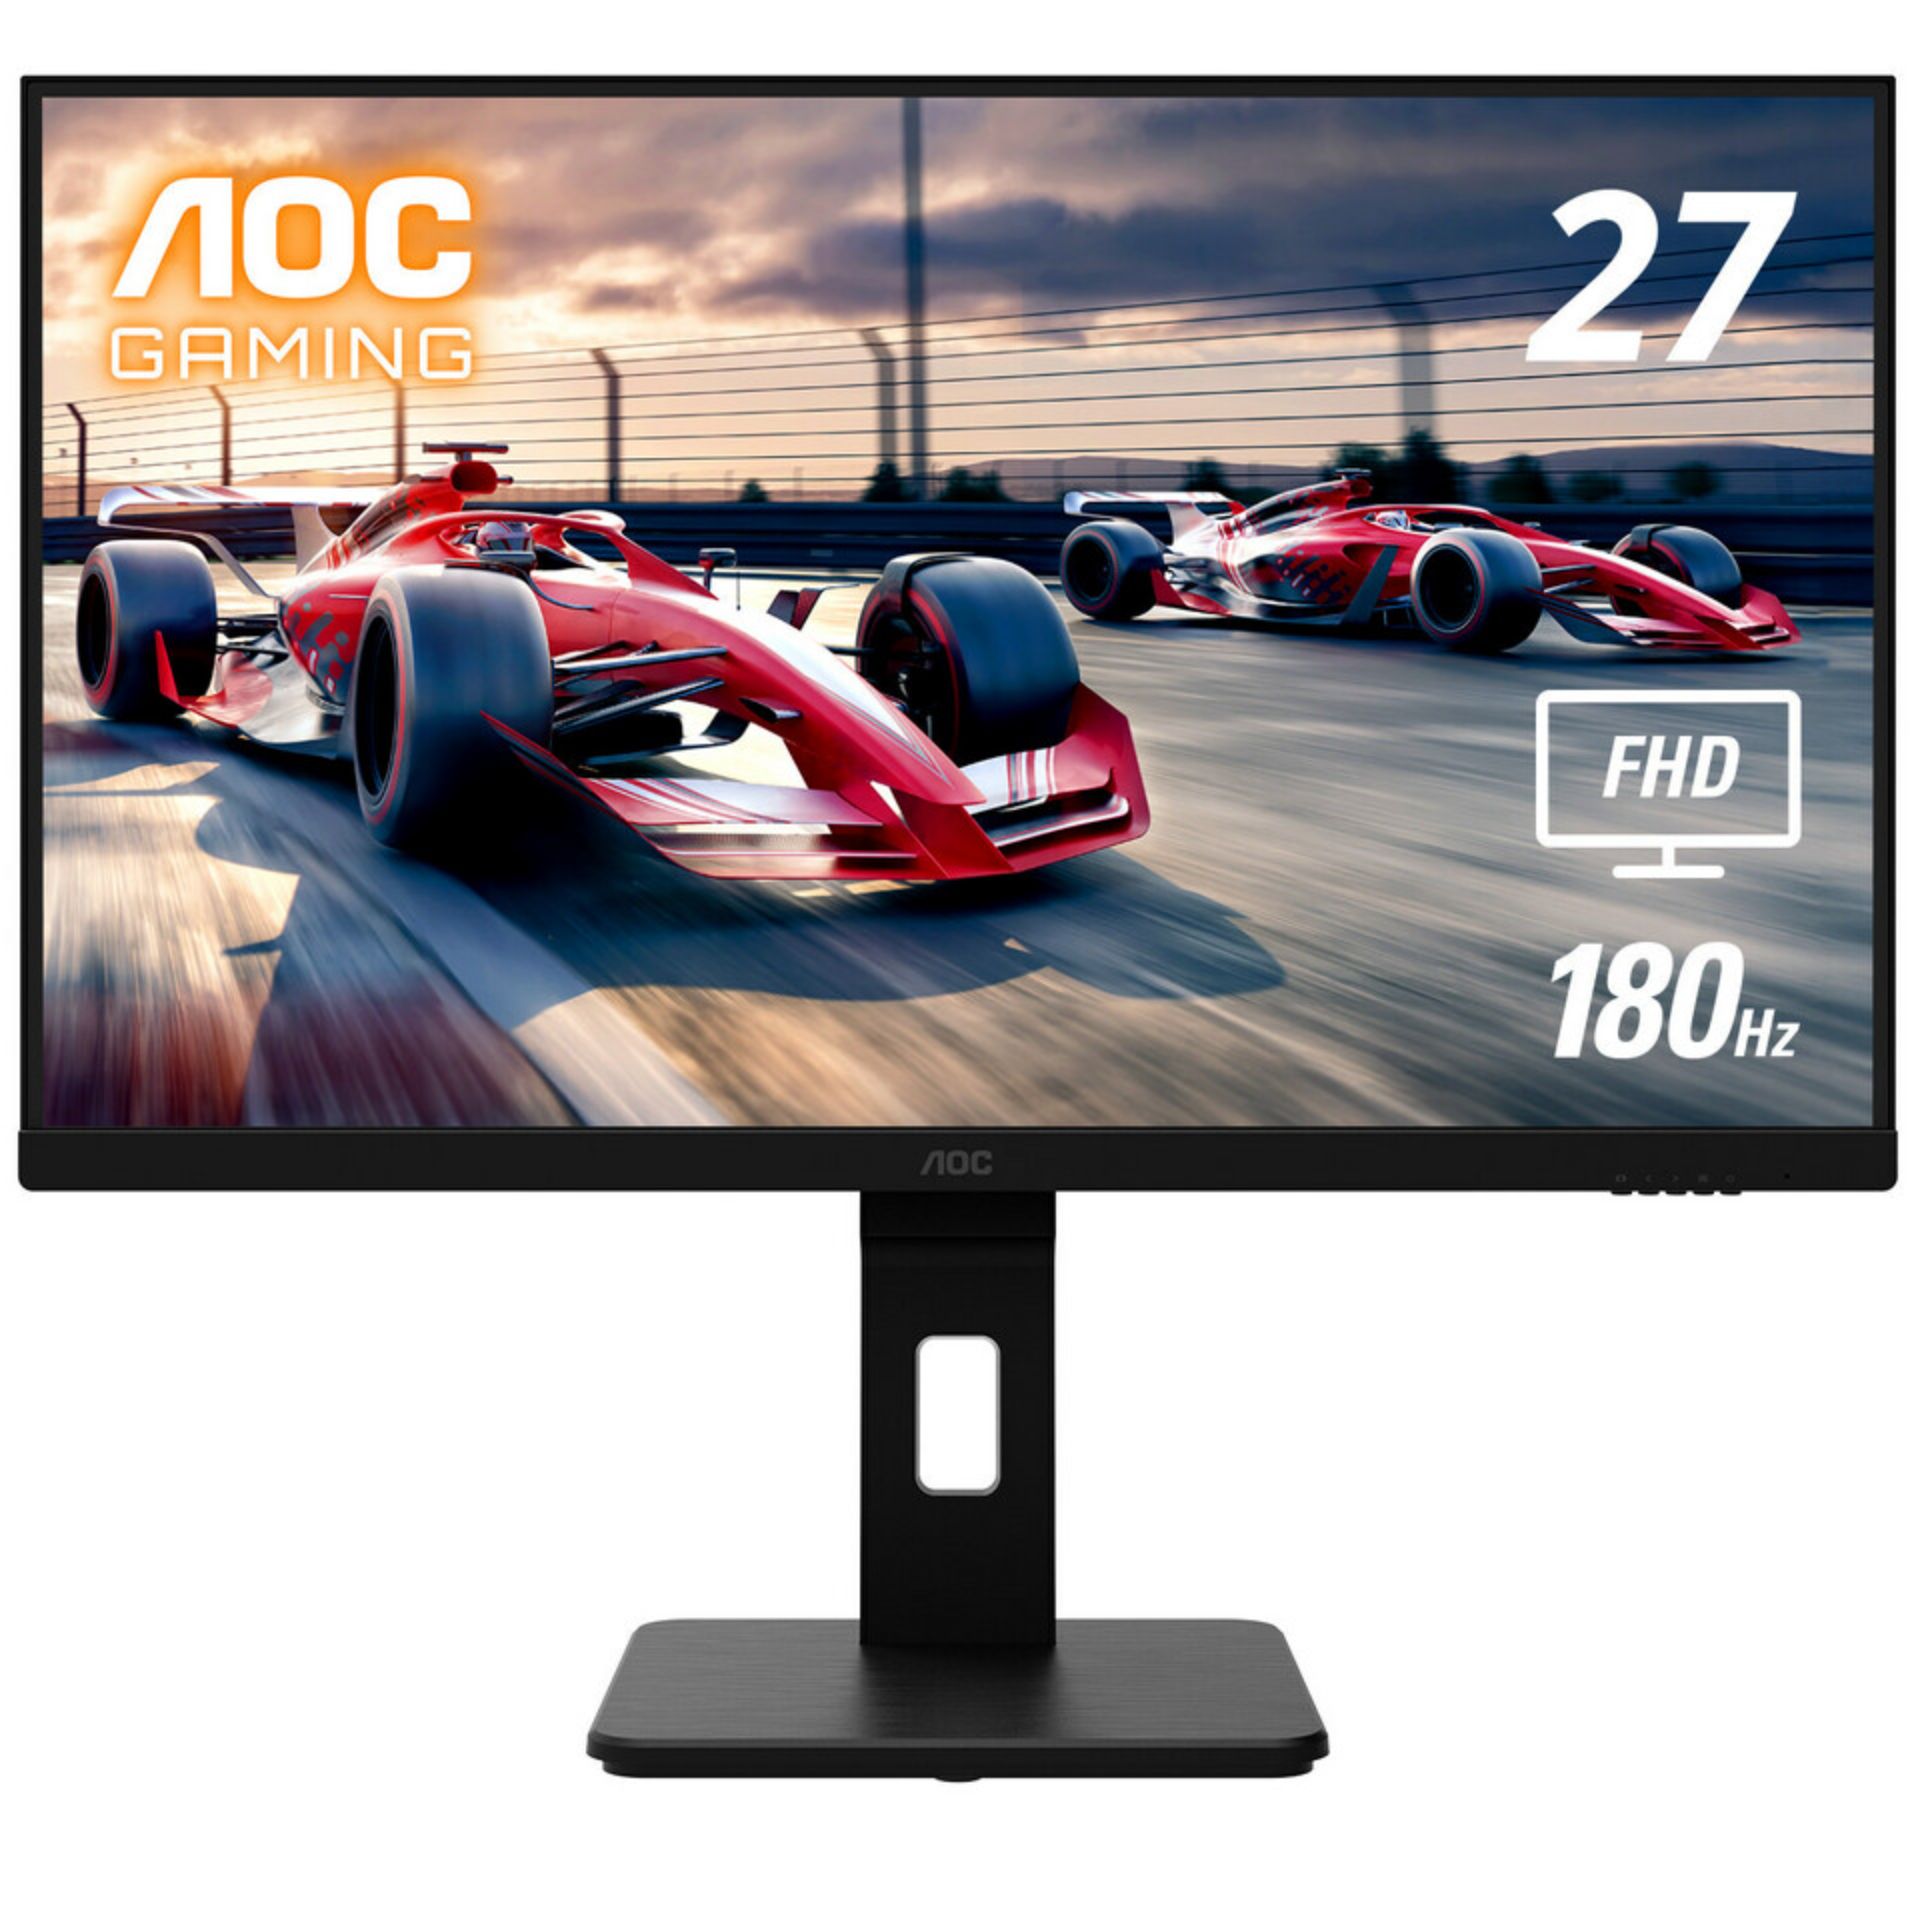 AGON by AOC Reveals New Budget 180Hz Gaming Monitor For Just $150 - eTeknix